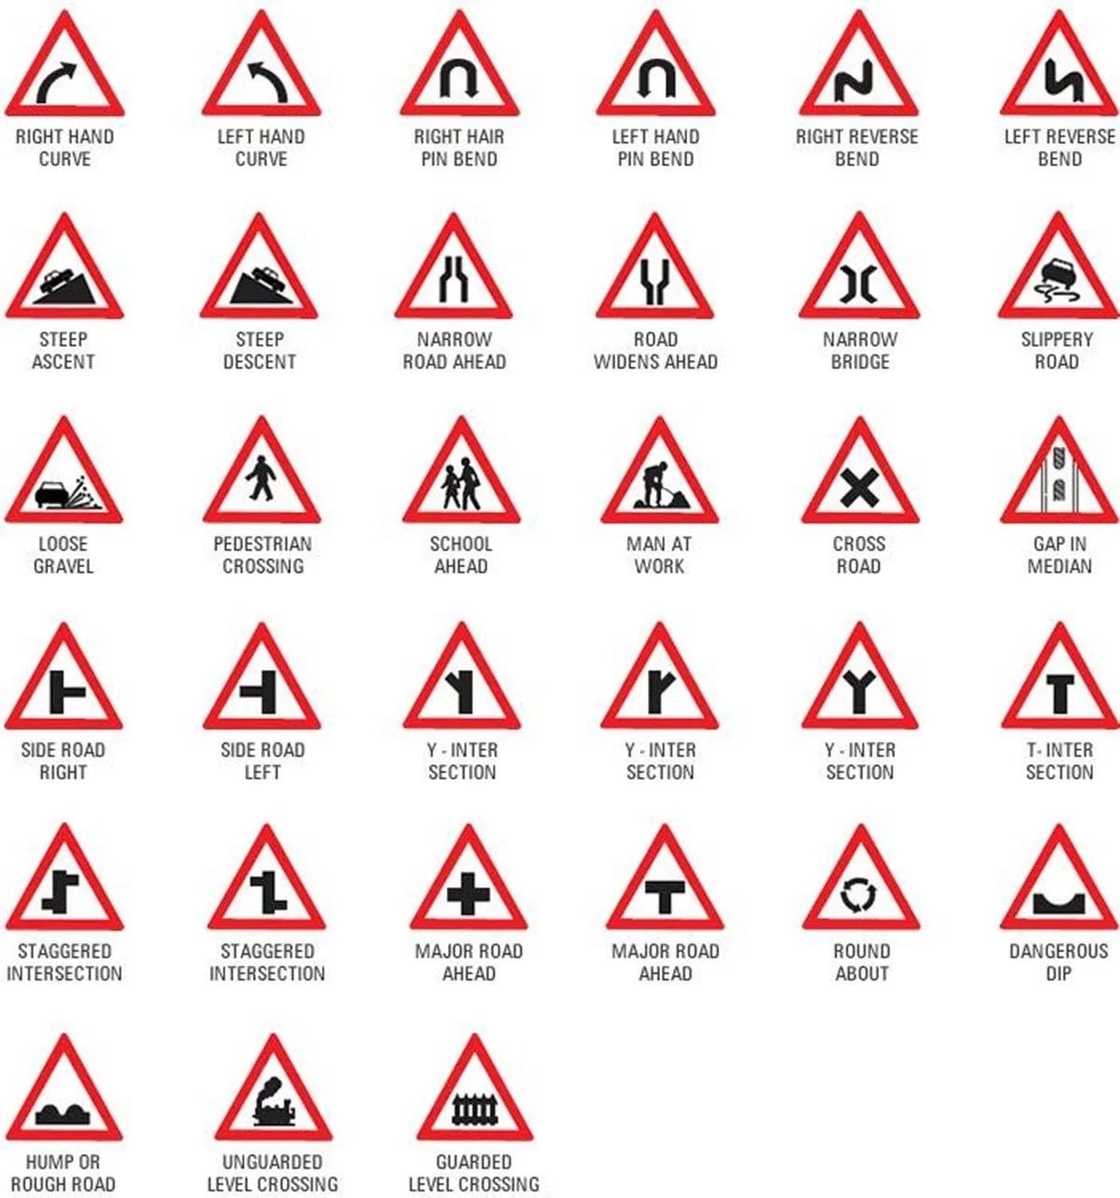 Road Signs and Their Meaning in Ghana